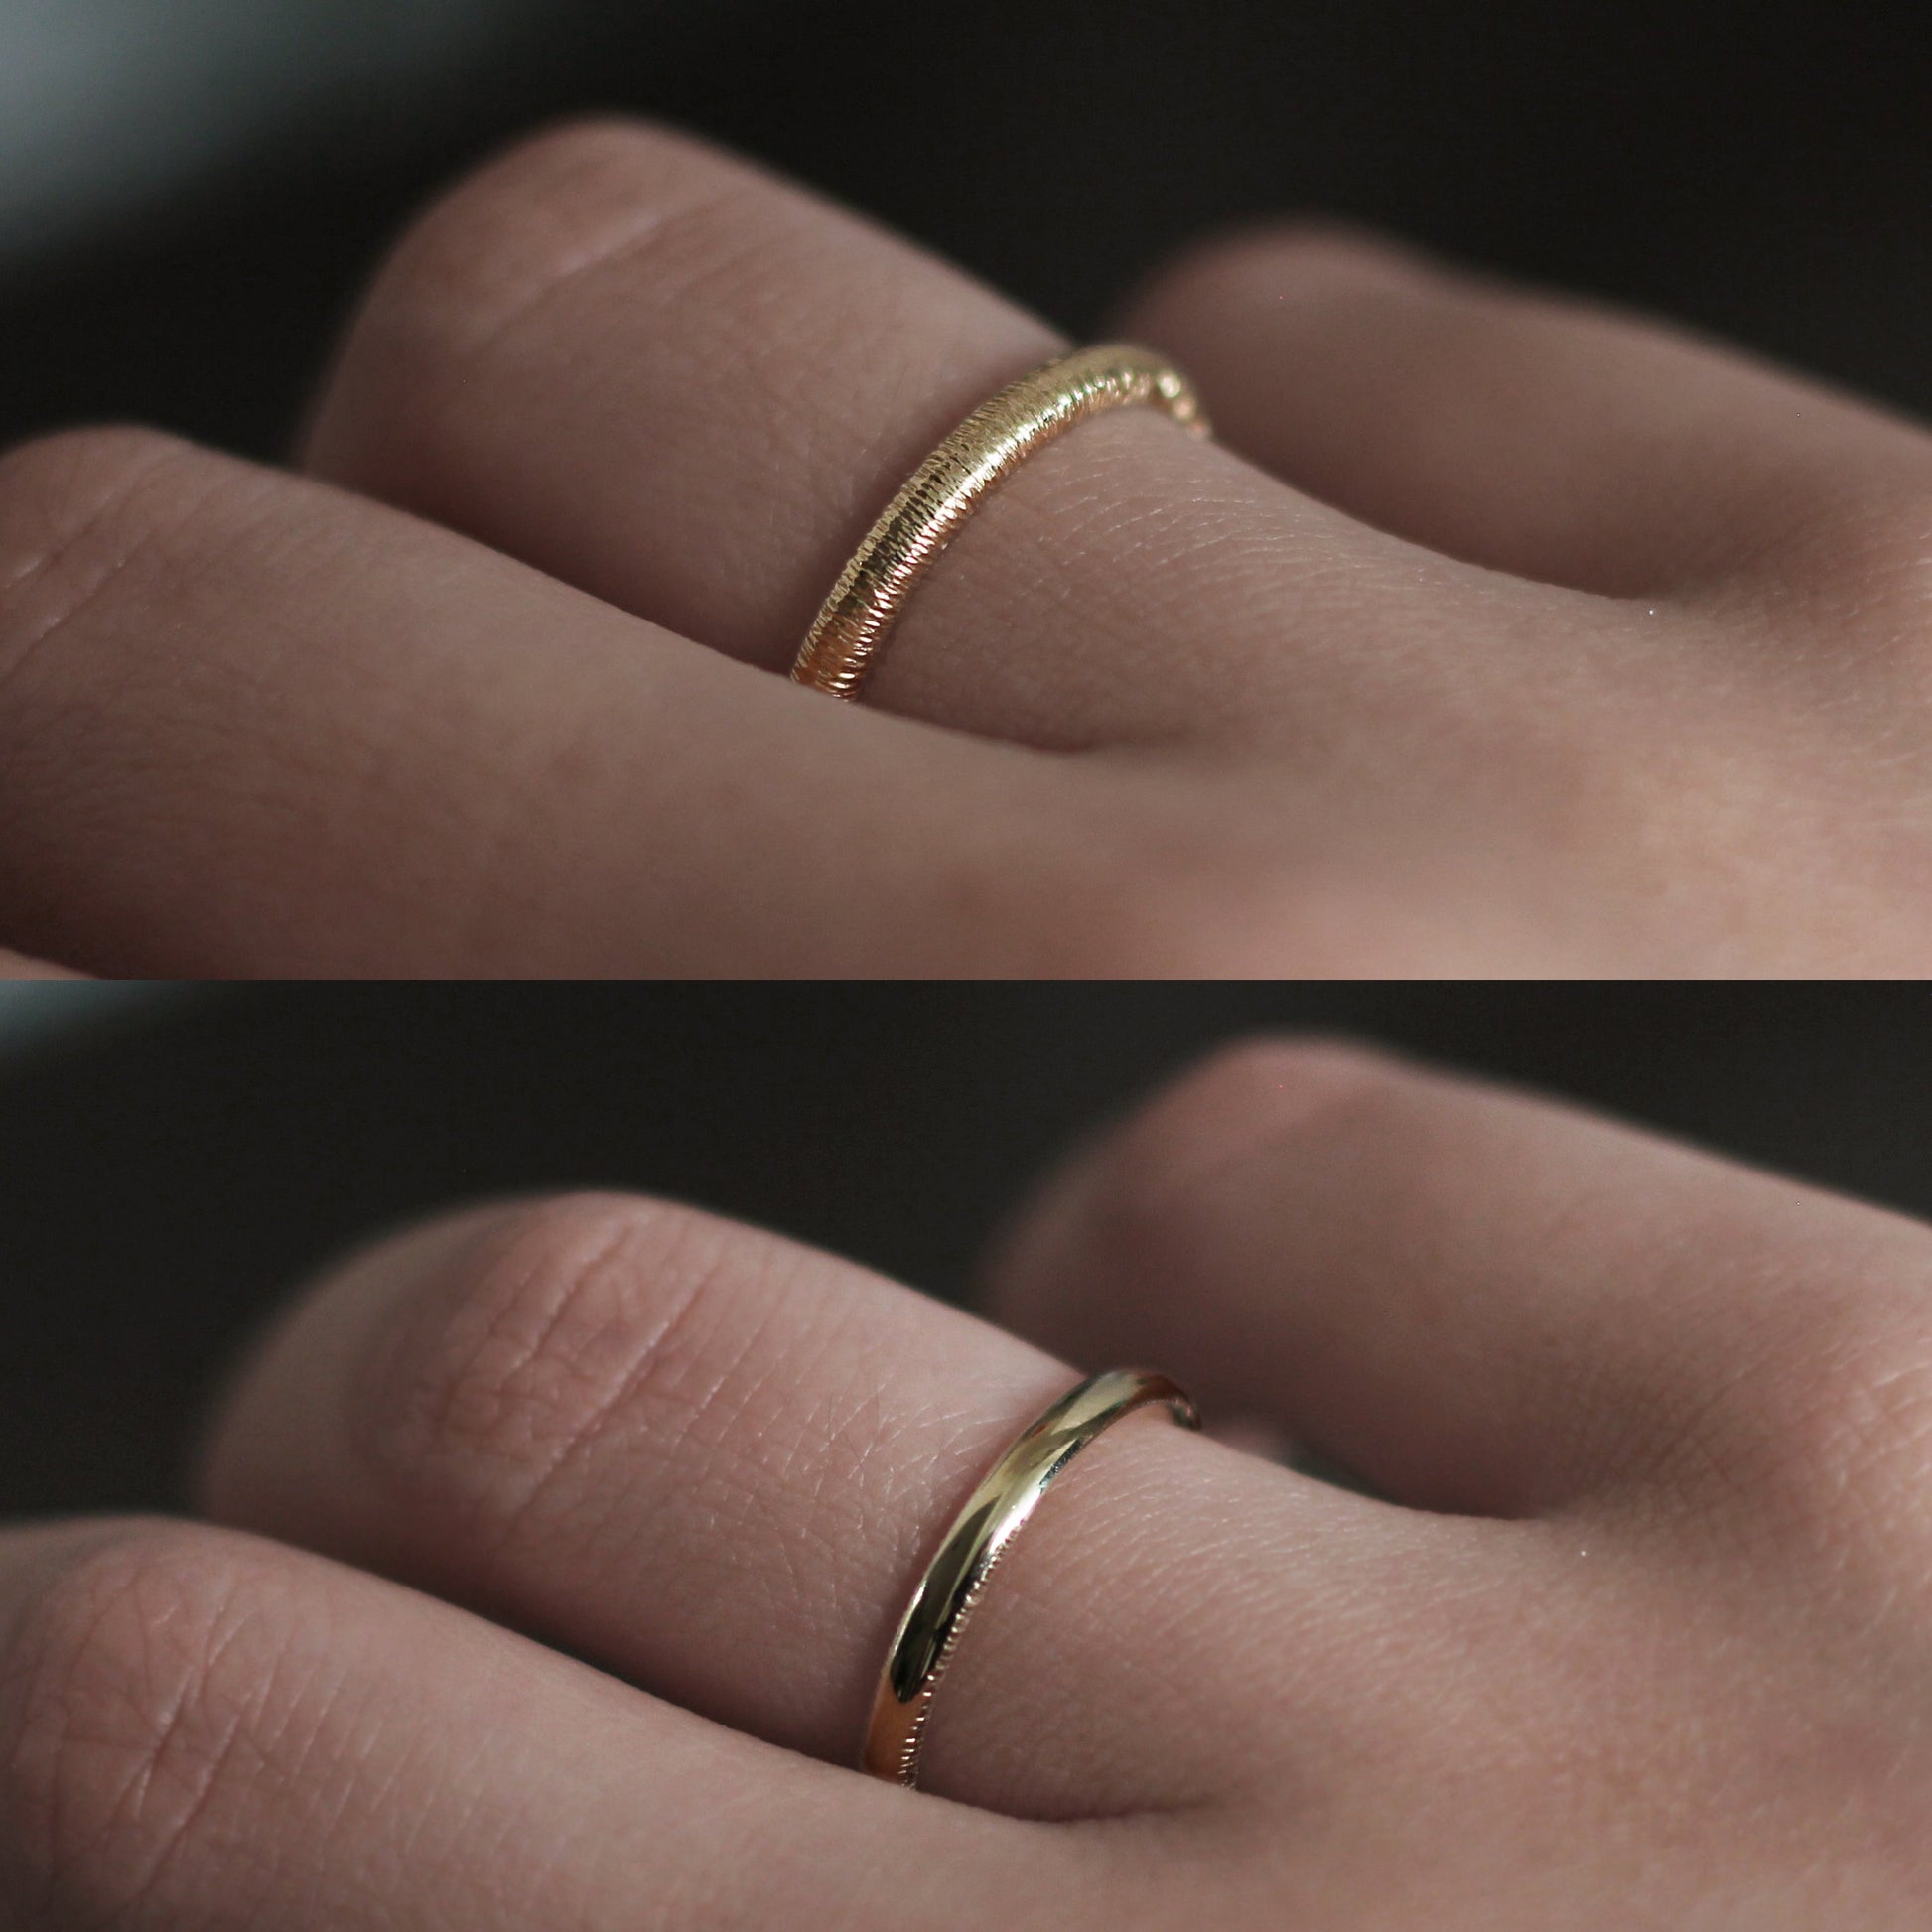 Moonlight Hammered Ring - 9ct / 18ct Gold, different angles - Aisling Chou Studio